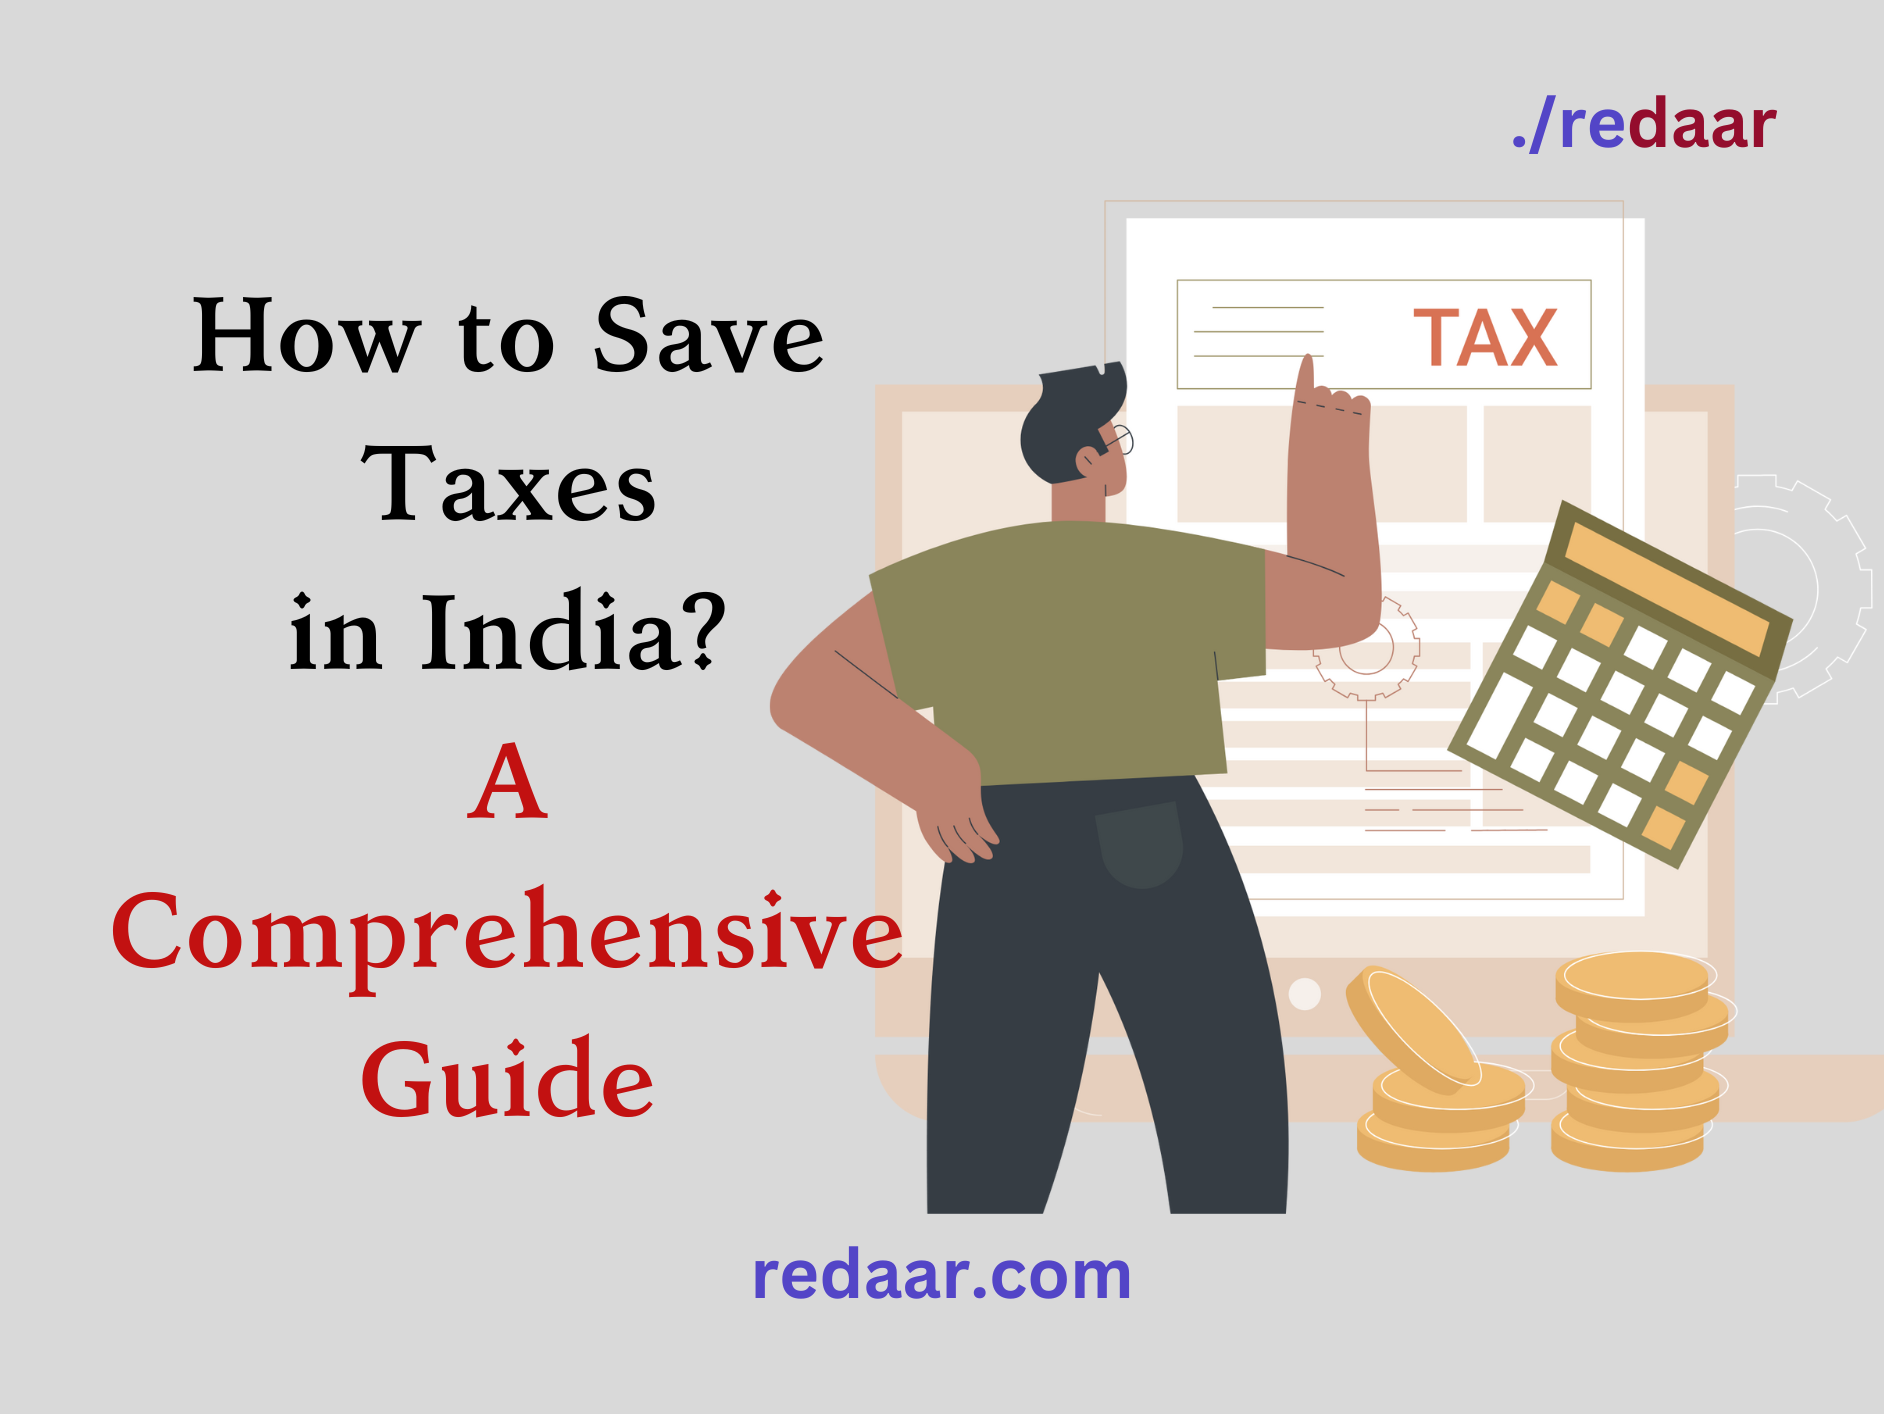 How to Save Taxes in India? A Comprehensive Guide